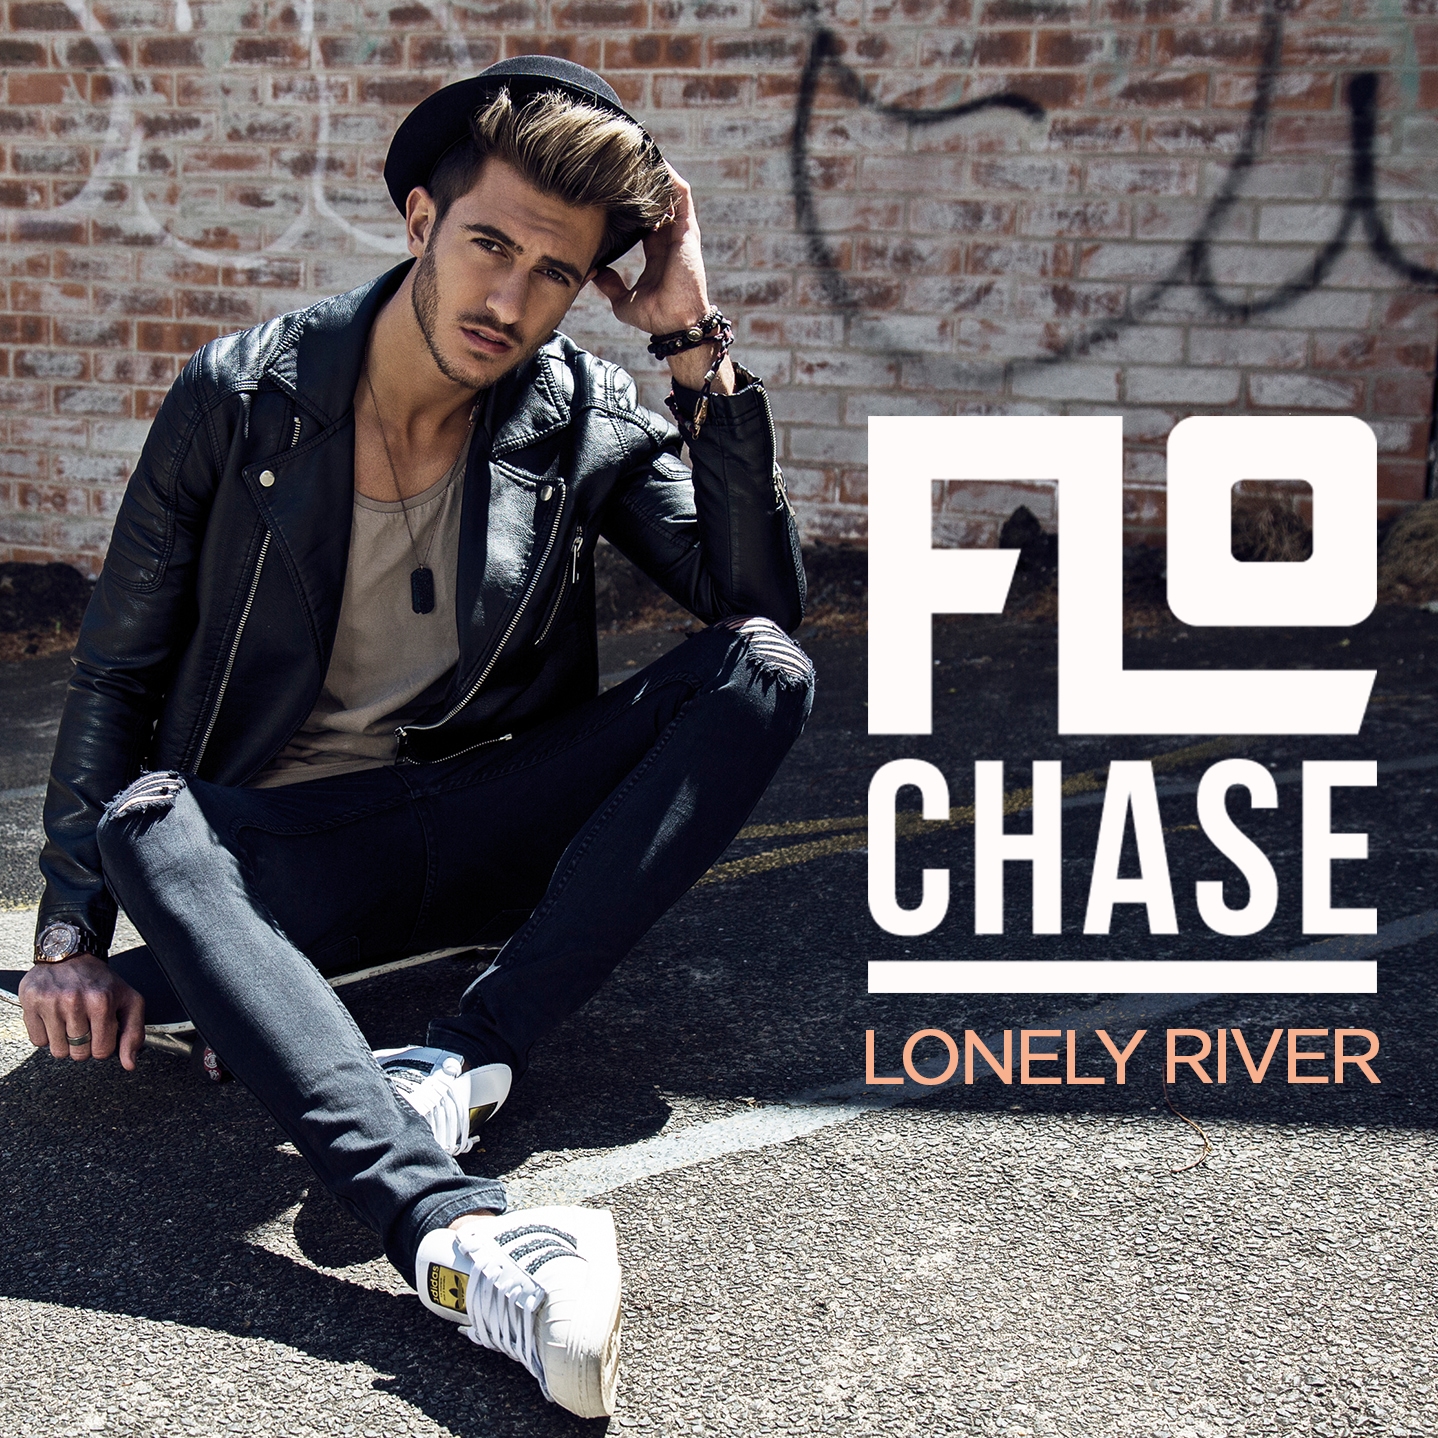 Flo Chase 'Lonely River'